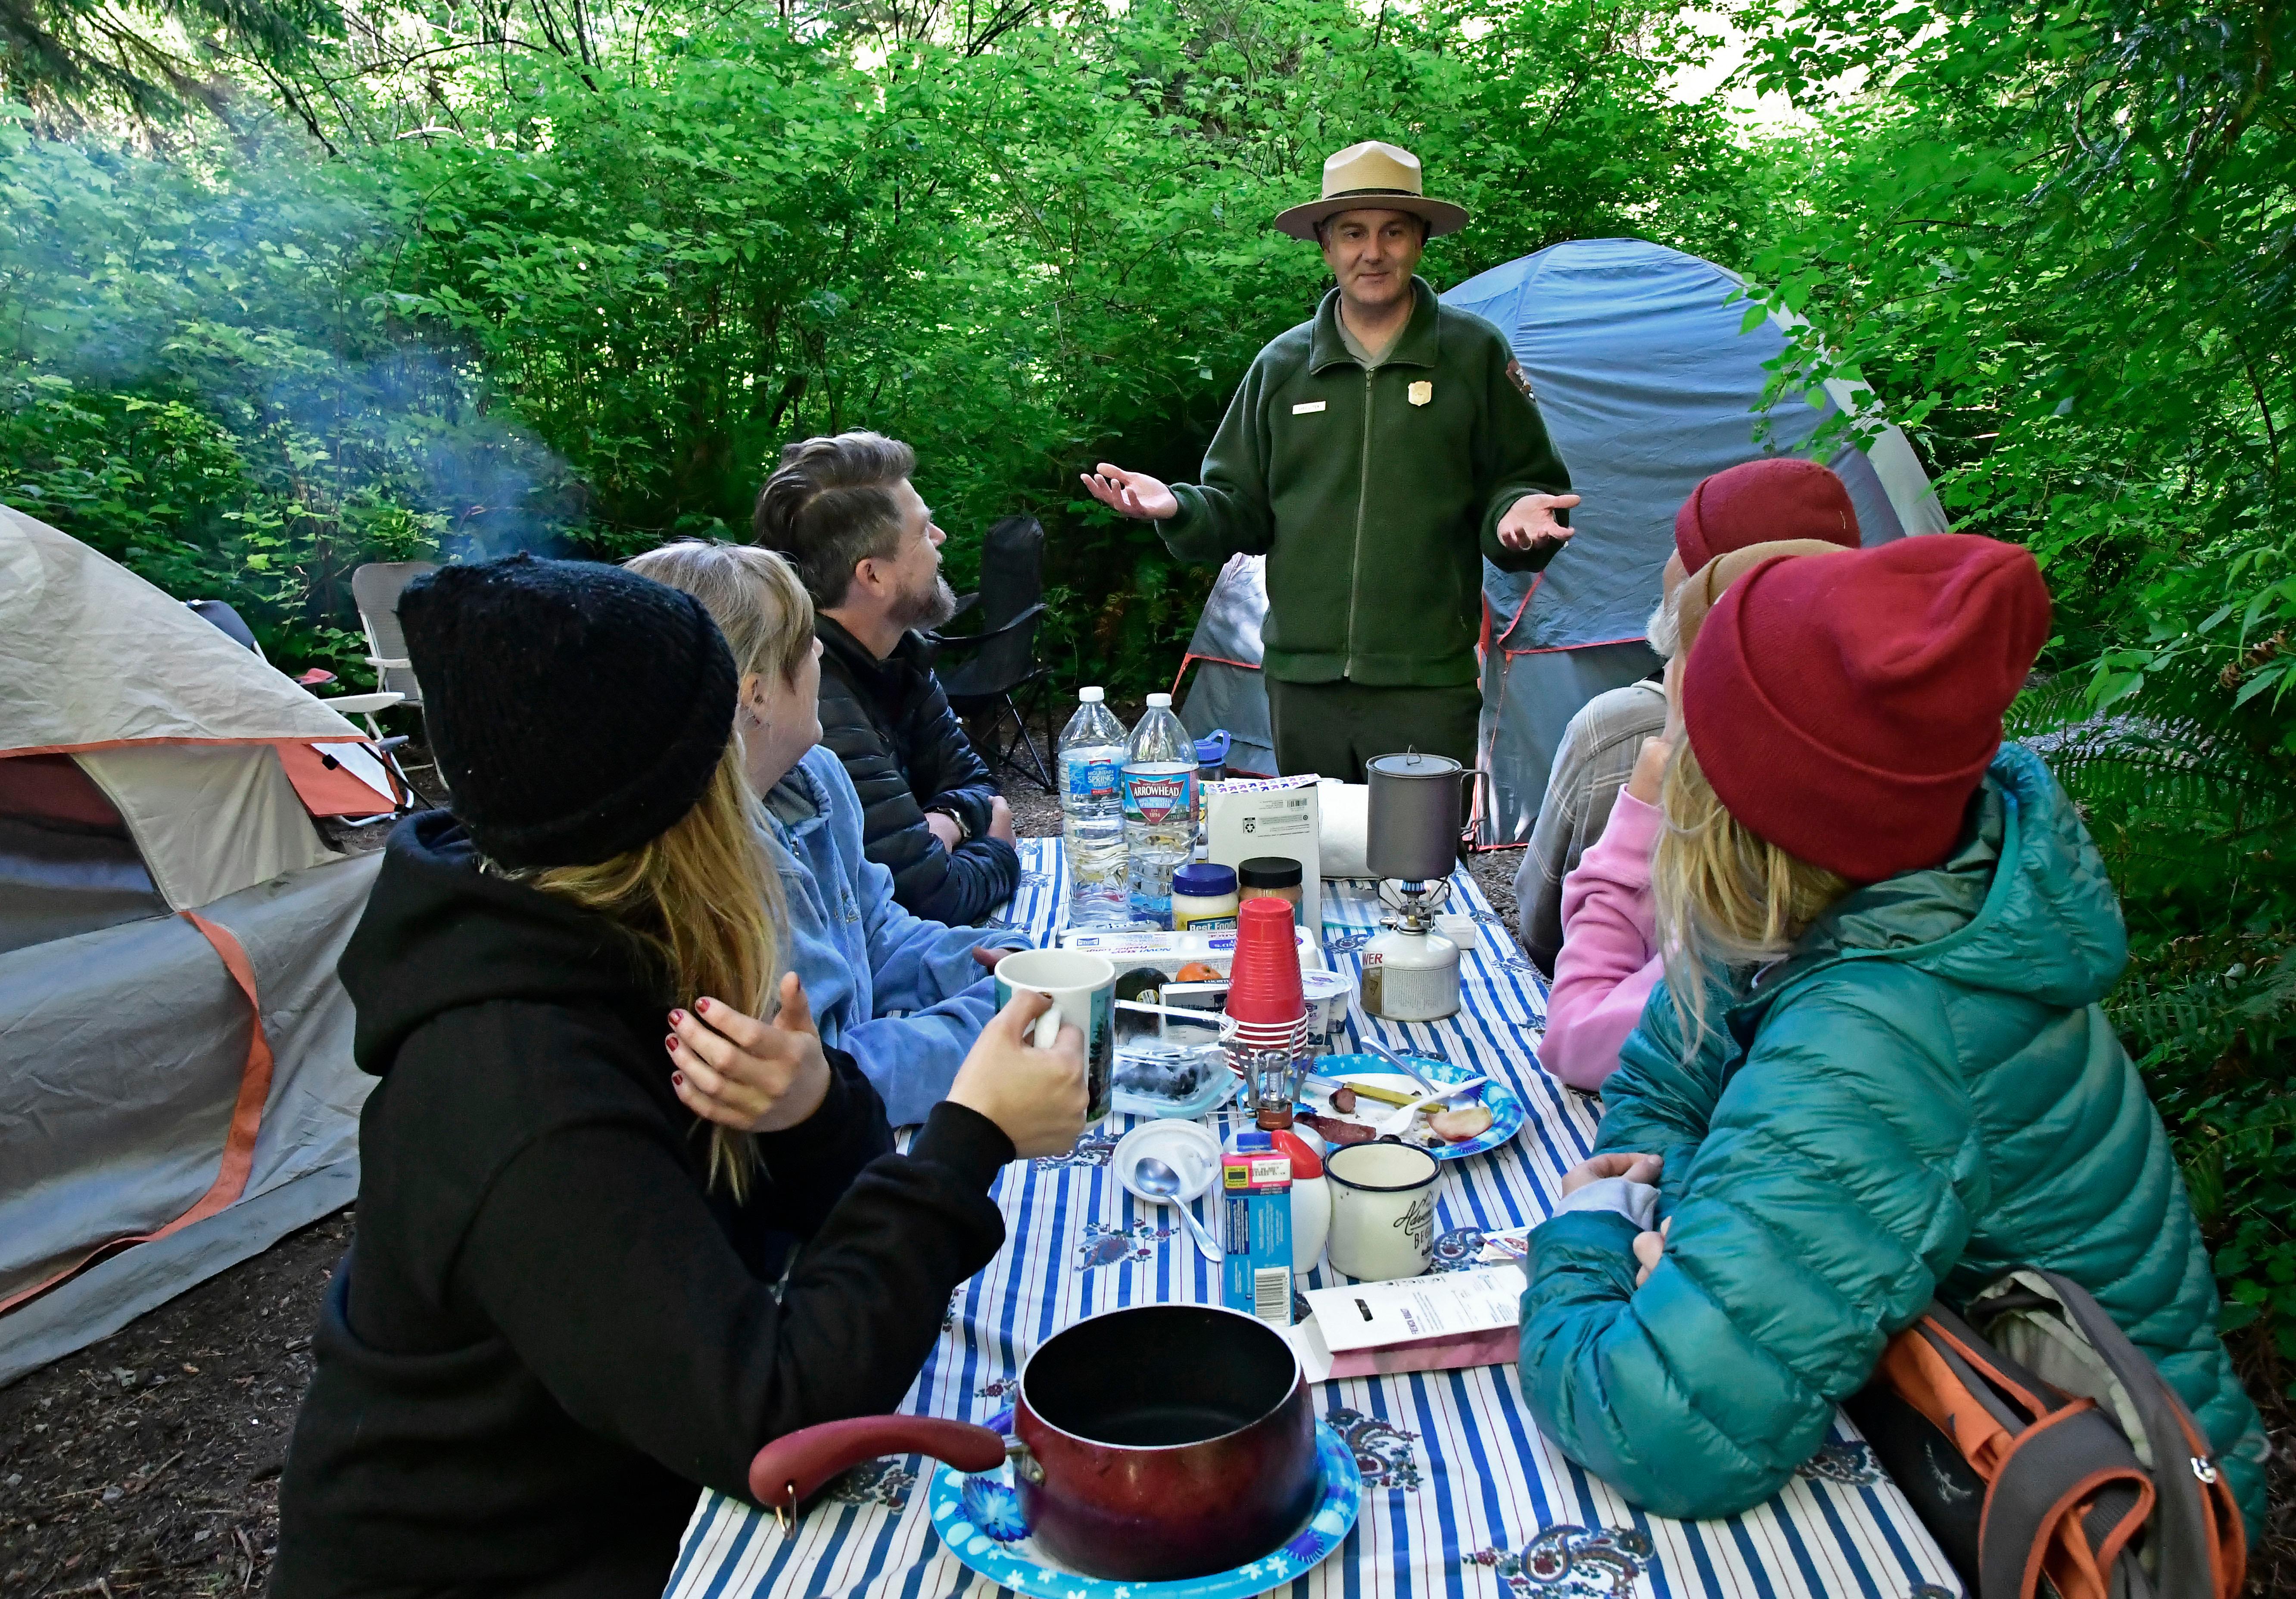 A park ranger chats with a  family sitting at a picnic table. Two tents are nearby.